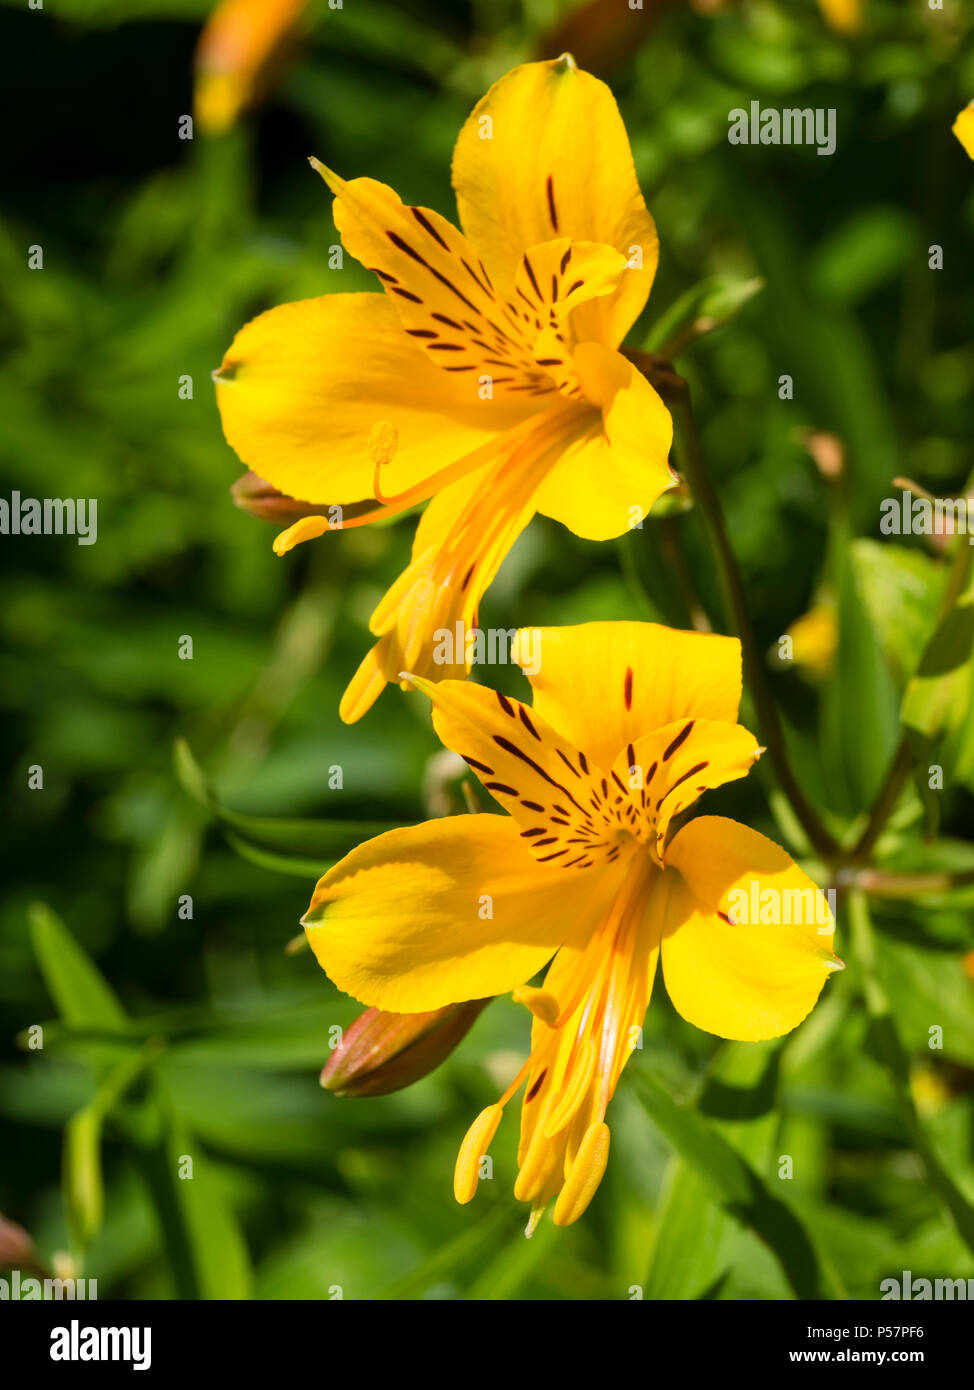 Yellow flowered form of the Peruvian lily, Alstroemeria aurea (A.aurantiaca), blooming in early summer. Stock Photo